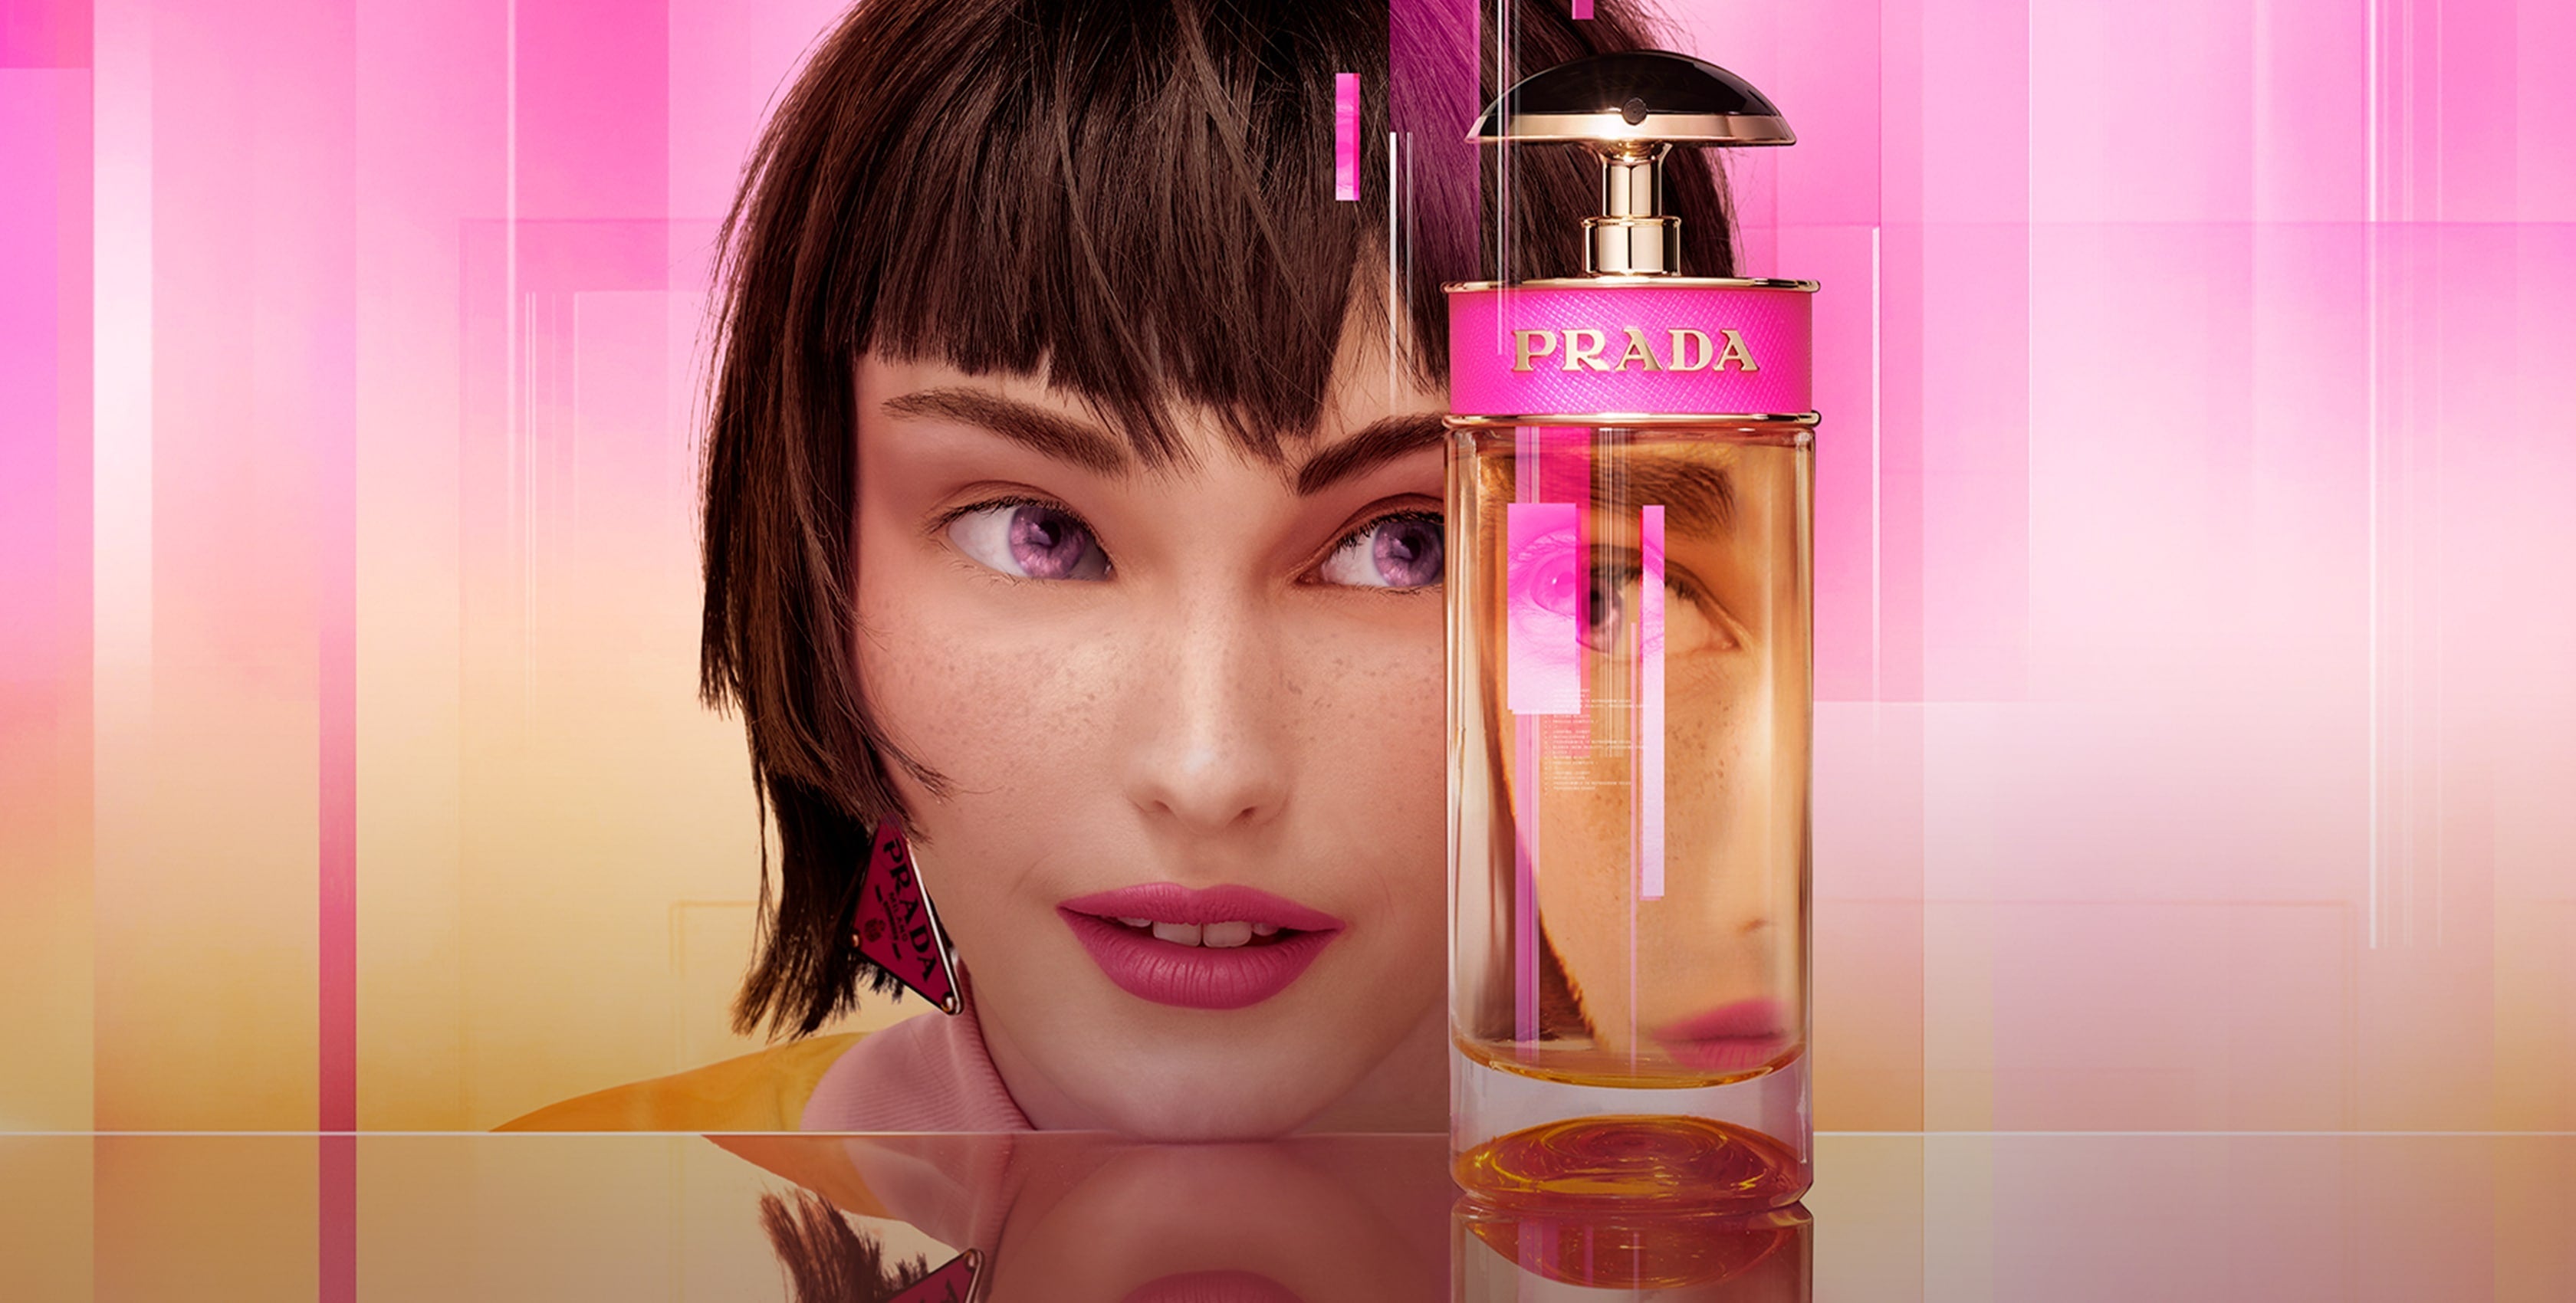 Prada Candy EDP: A Review of the Classic Women's Fragrance - My Perfume Shop